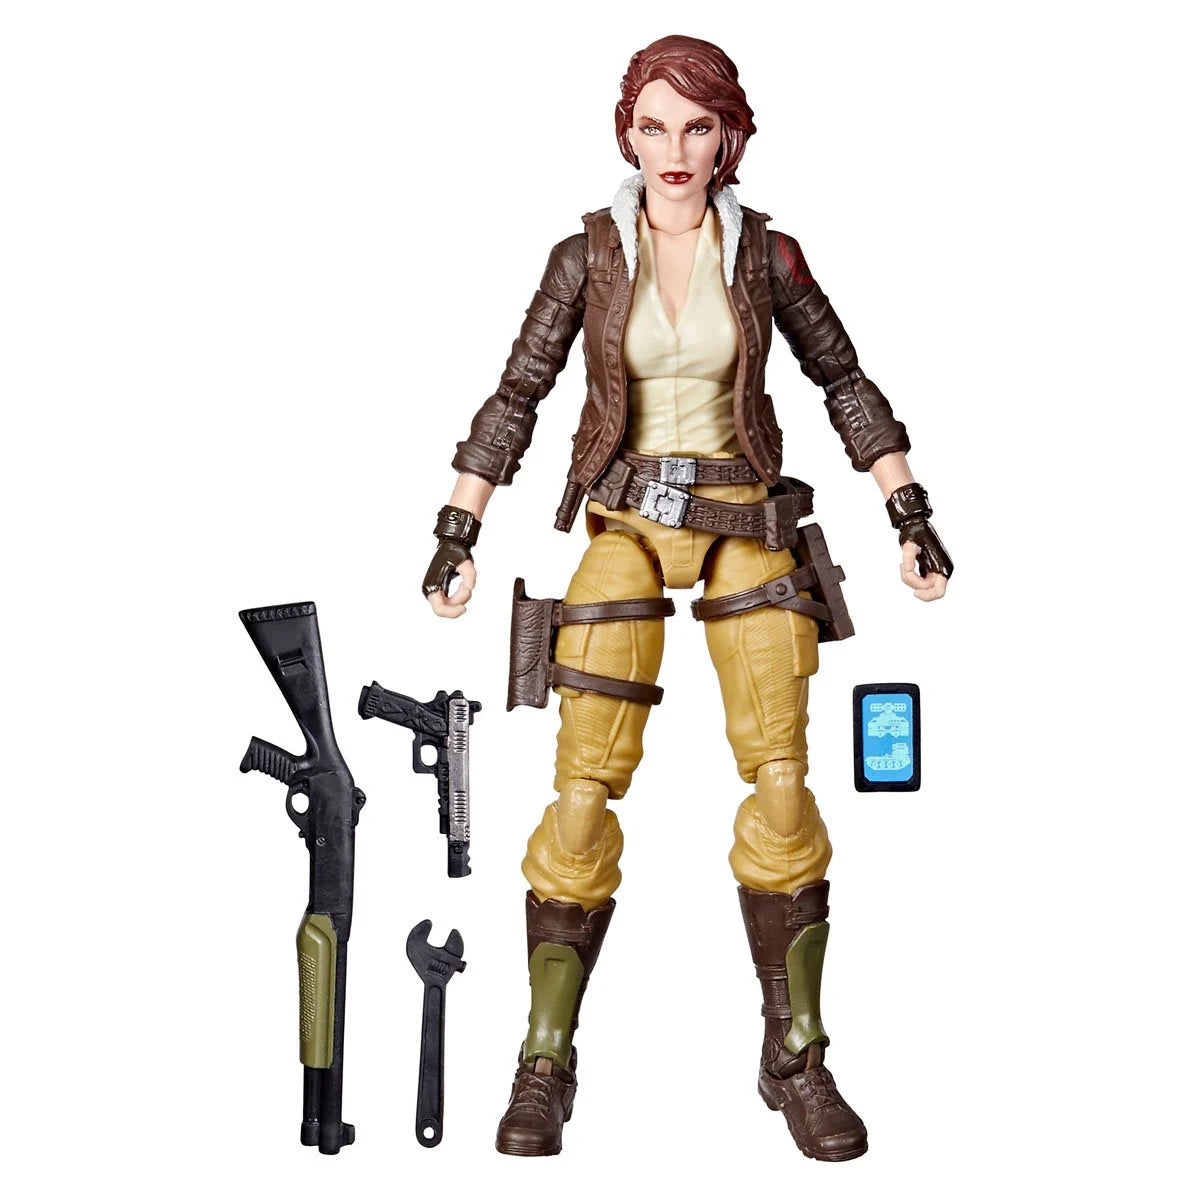 G.I. Joe Classified Series 6-Inch Courtney "Cover Girl" Krieger Action Figure